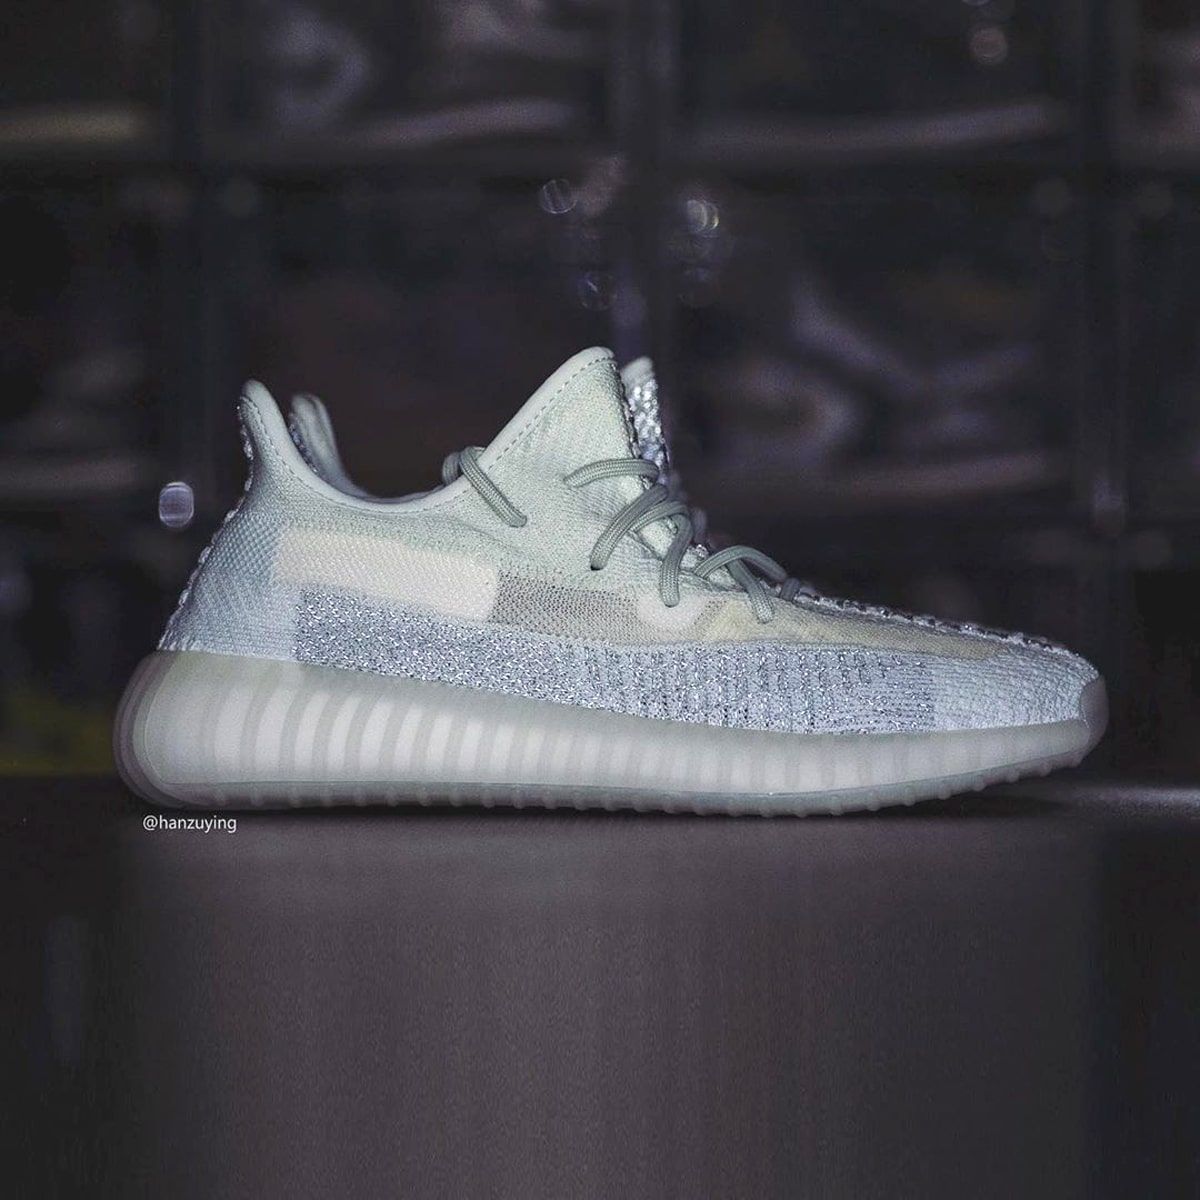 yeezy supply cloud white reflective